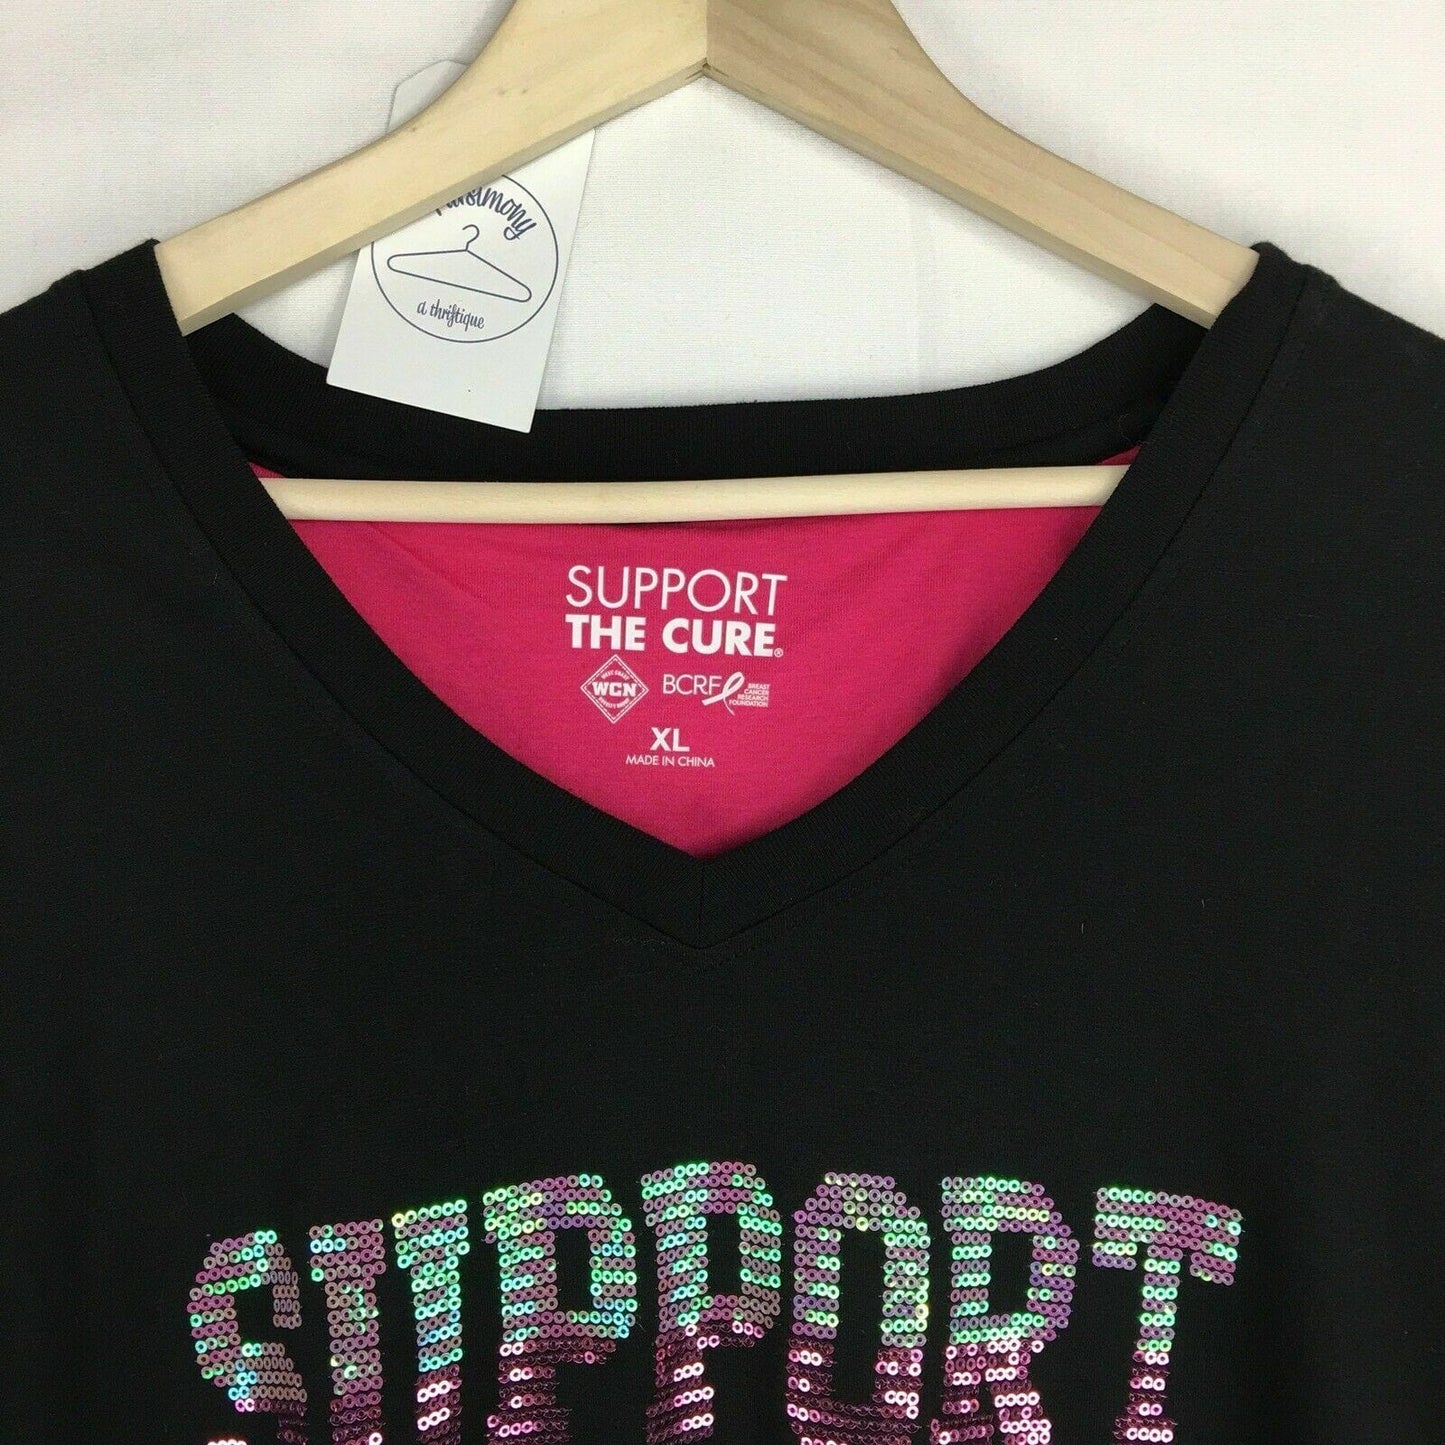 Breast Cancer Awareness Womens Size XL Black V-Neck T-Shirt “Support the Cure” Sequined L/s